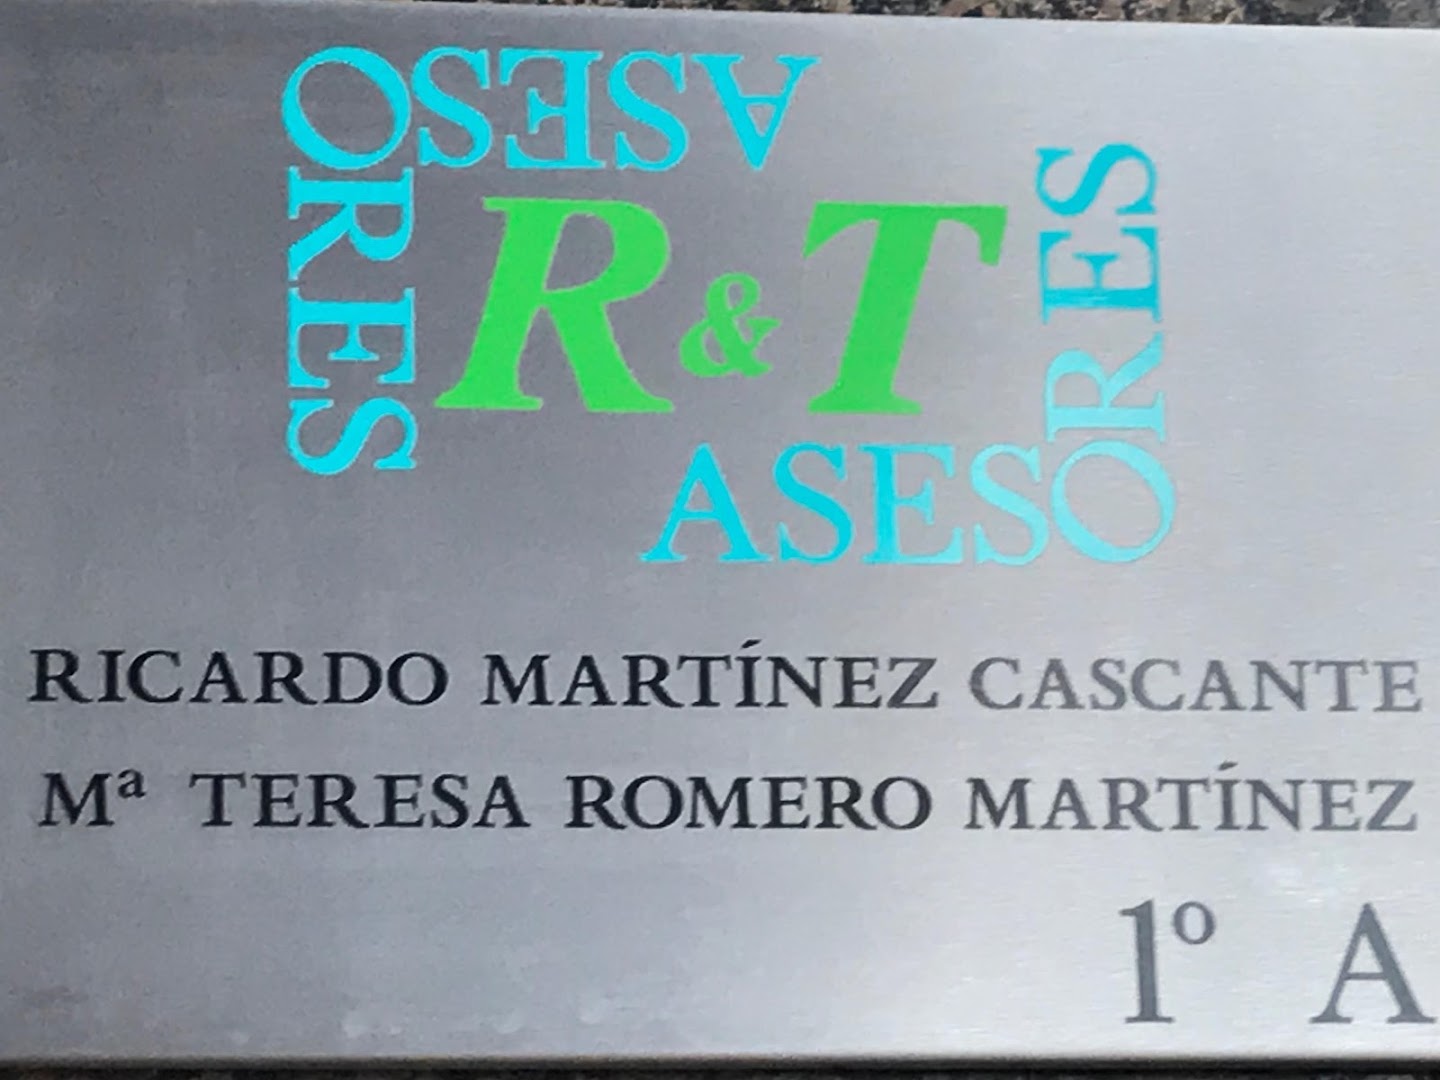 R & T Asesores